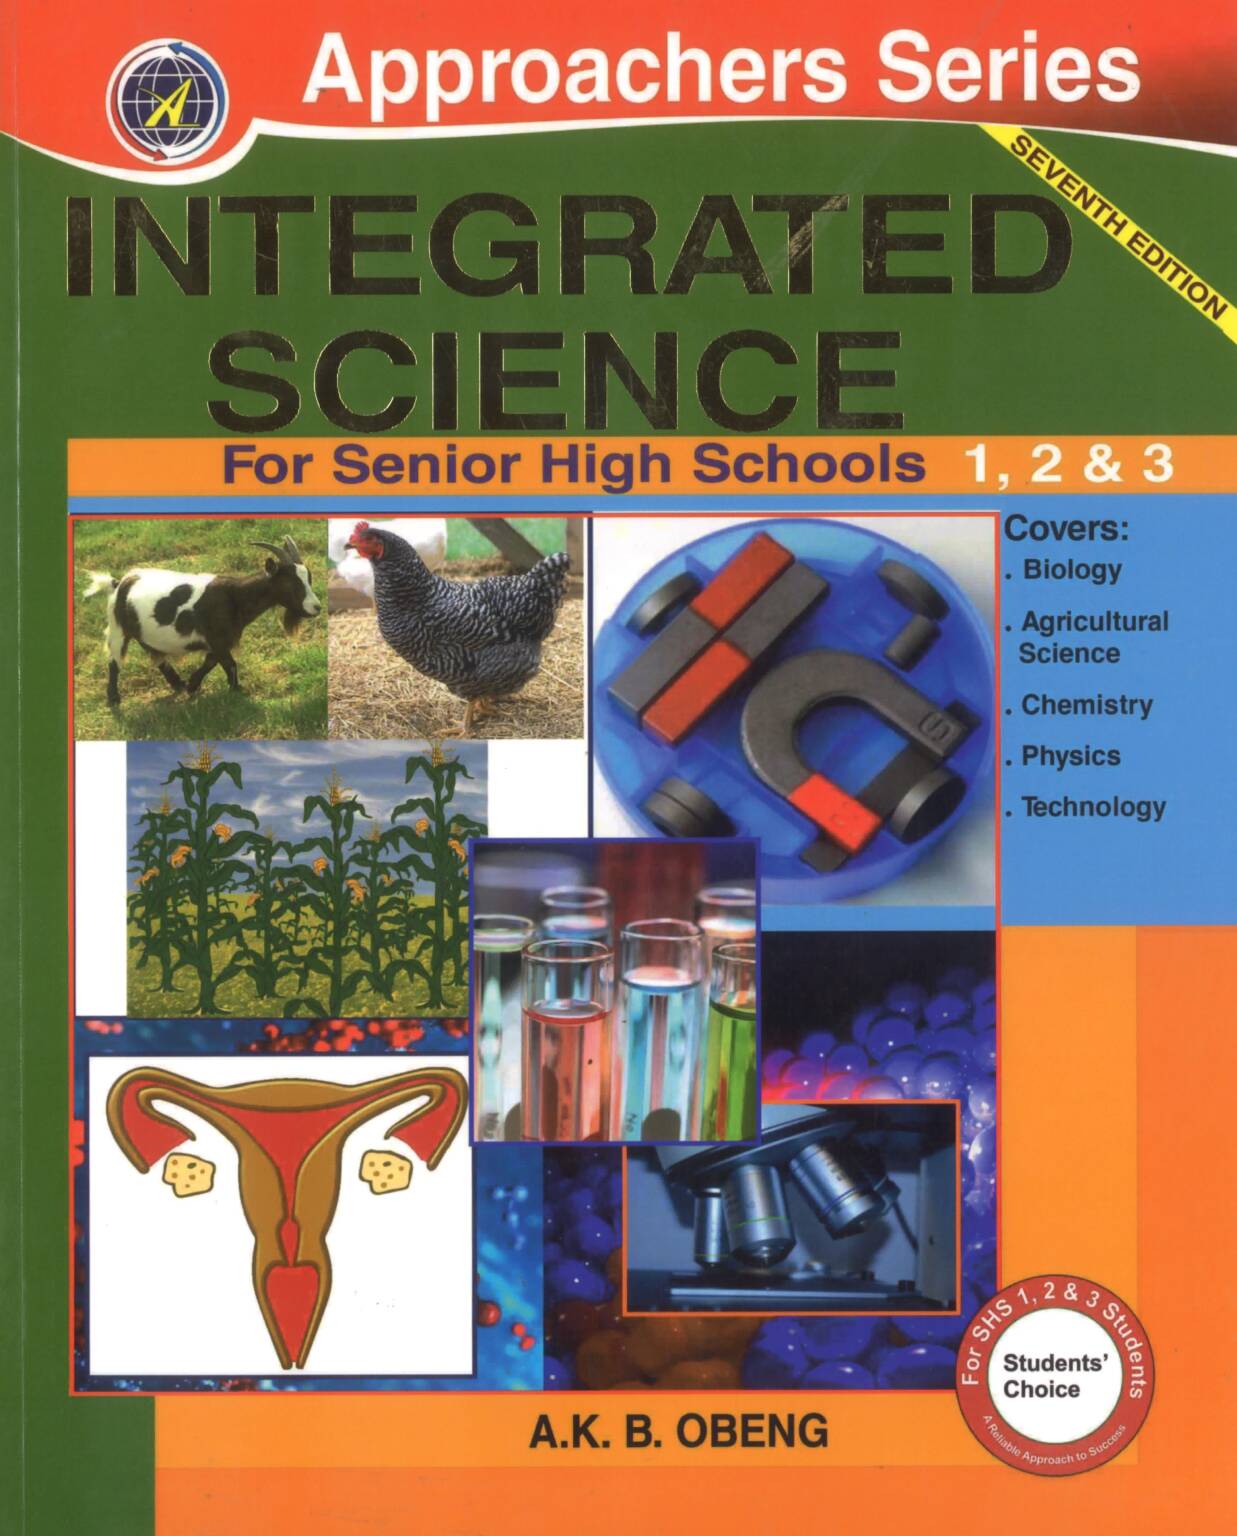 project topics on integrated science education